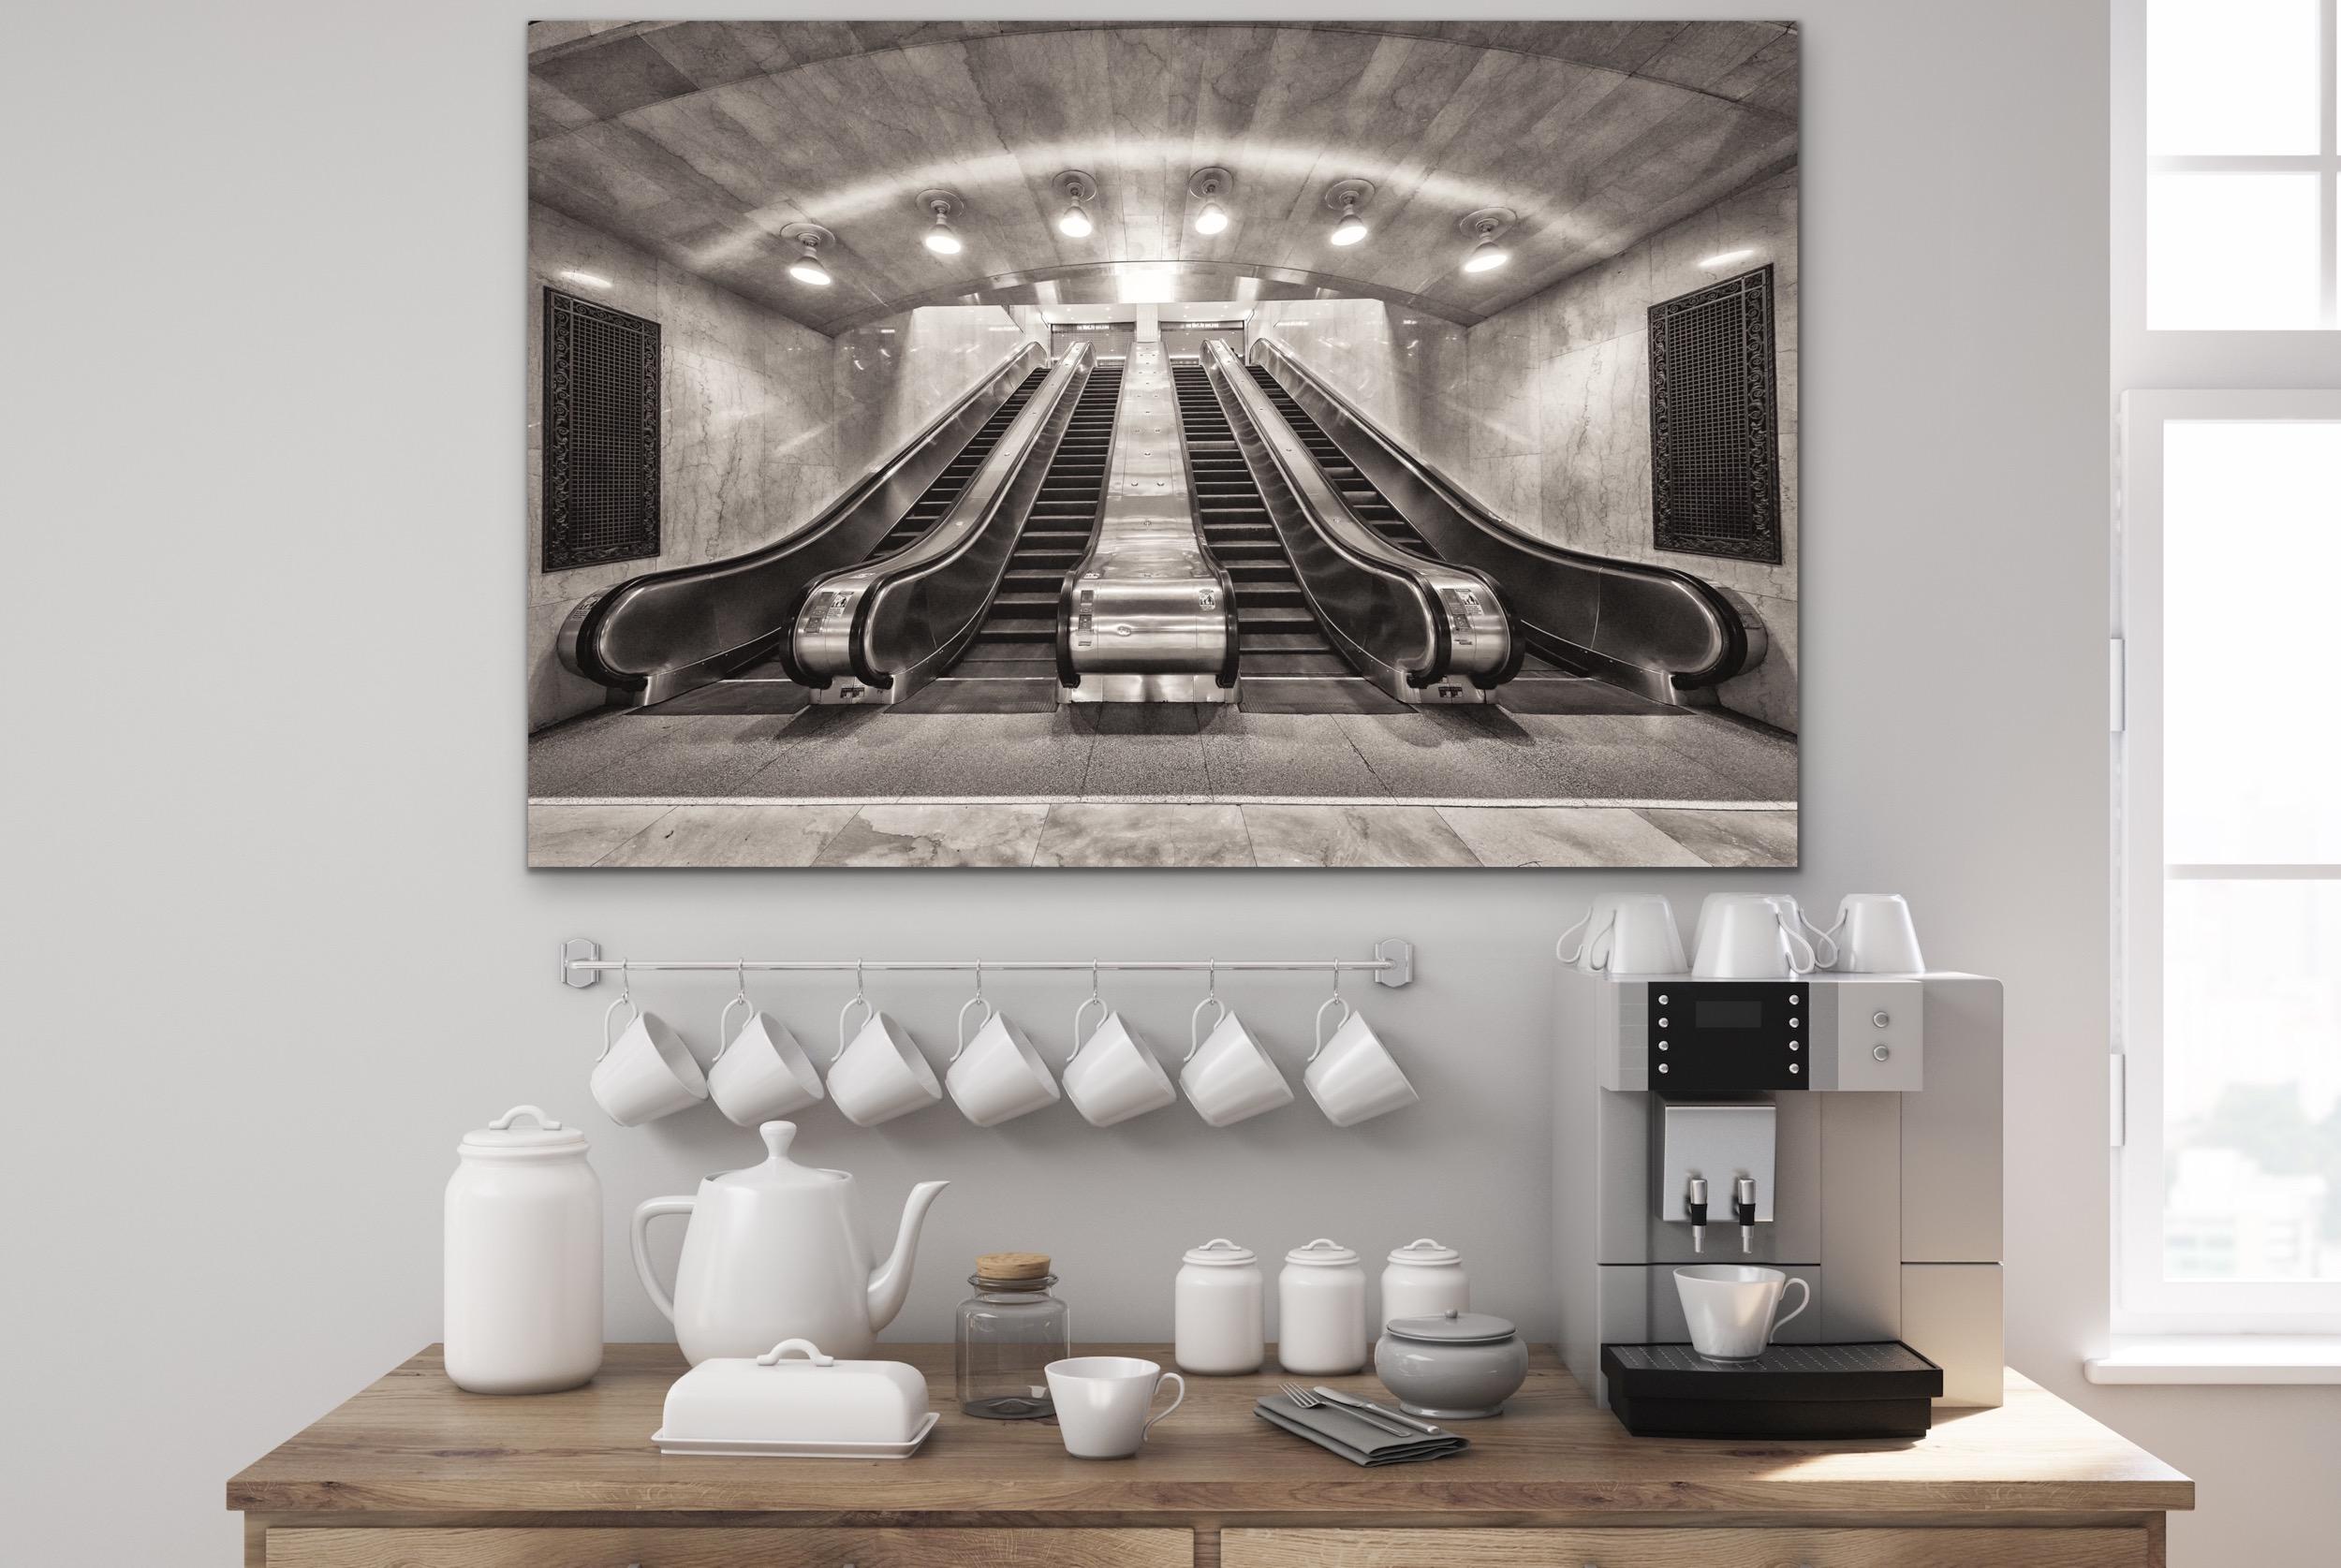 This black and white, contemporary architectural photograph by Peter Mendelson features the Oyster Bar Restaurant entry way in Grand Central Station in Manhattan. Staircases lead down to a lower level on either side of the doorways, and patterned,